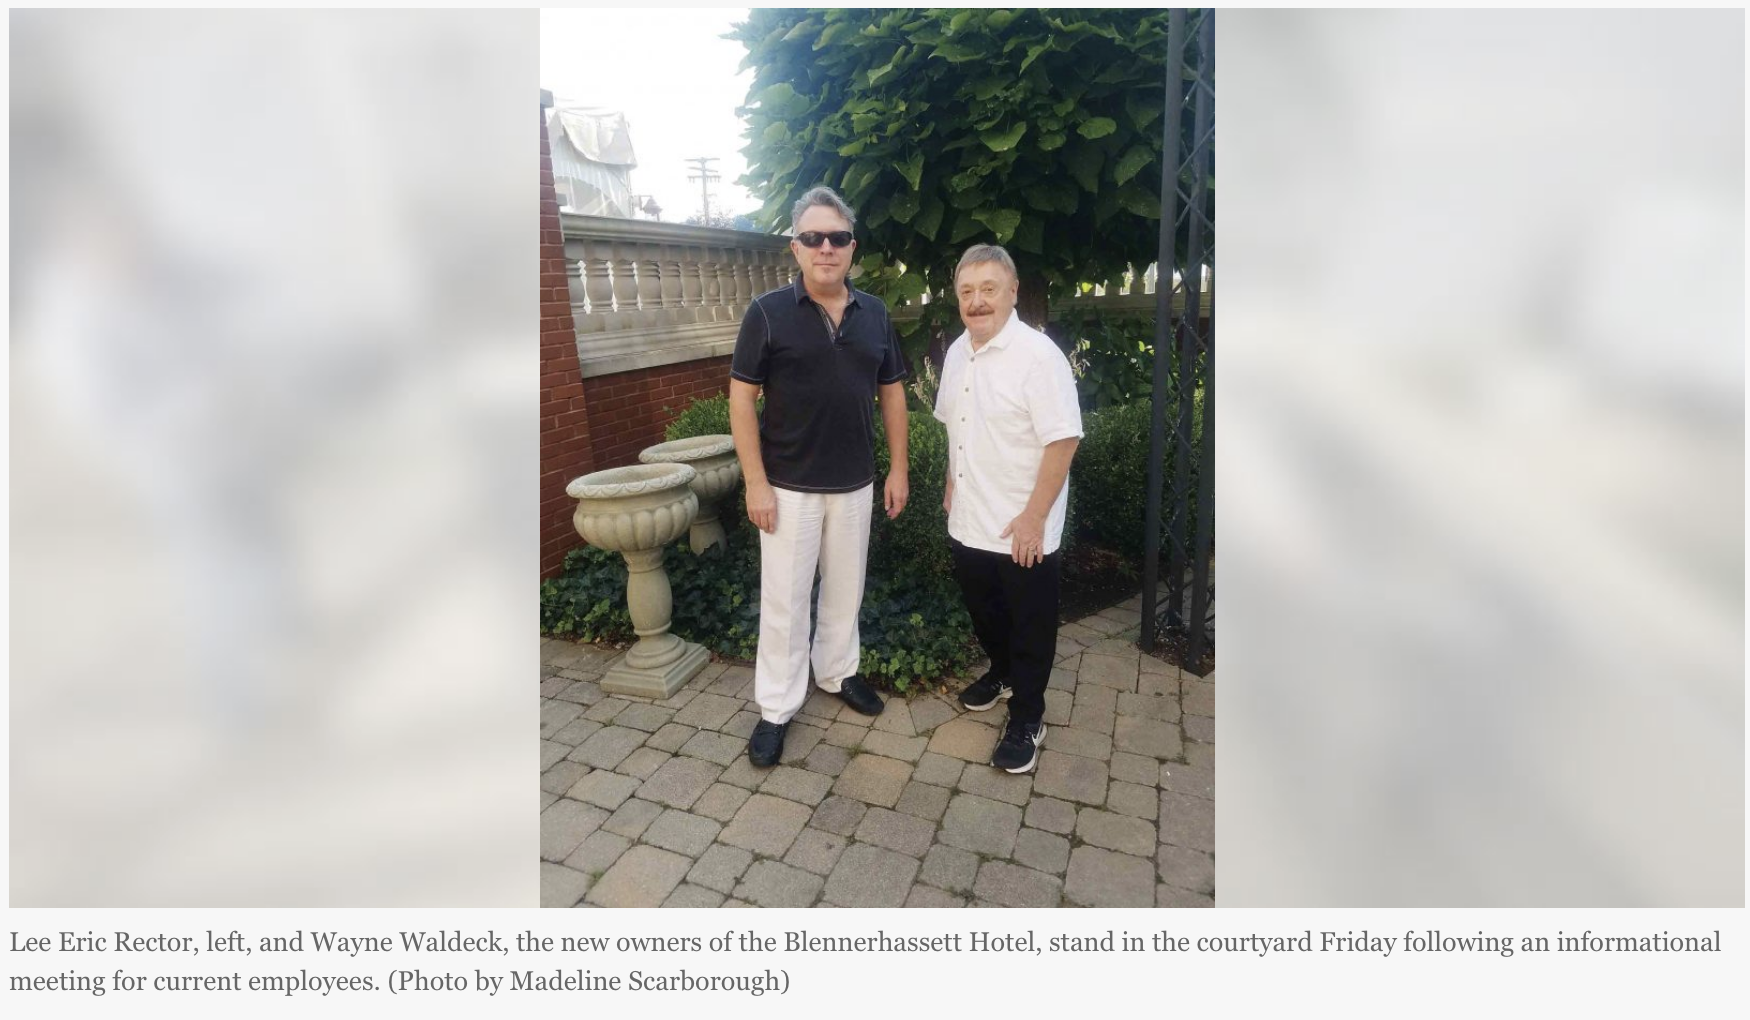 Blennerhassett Hotel Sold to New Owners Lee Eric Rector and Wayne Waldeck